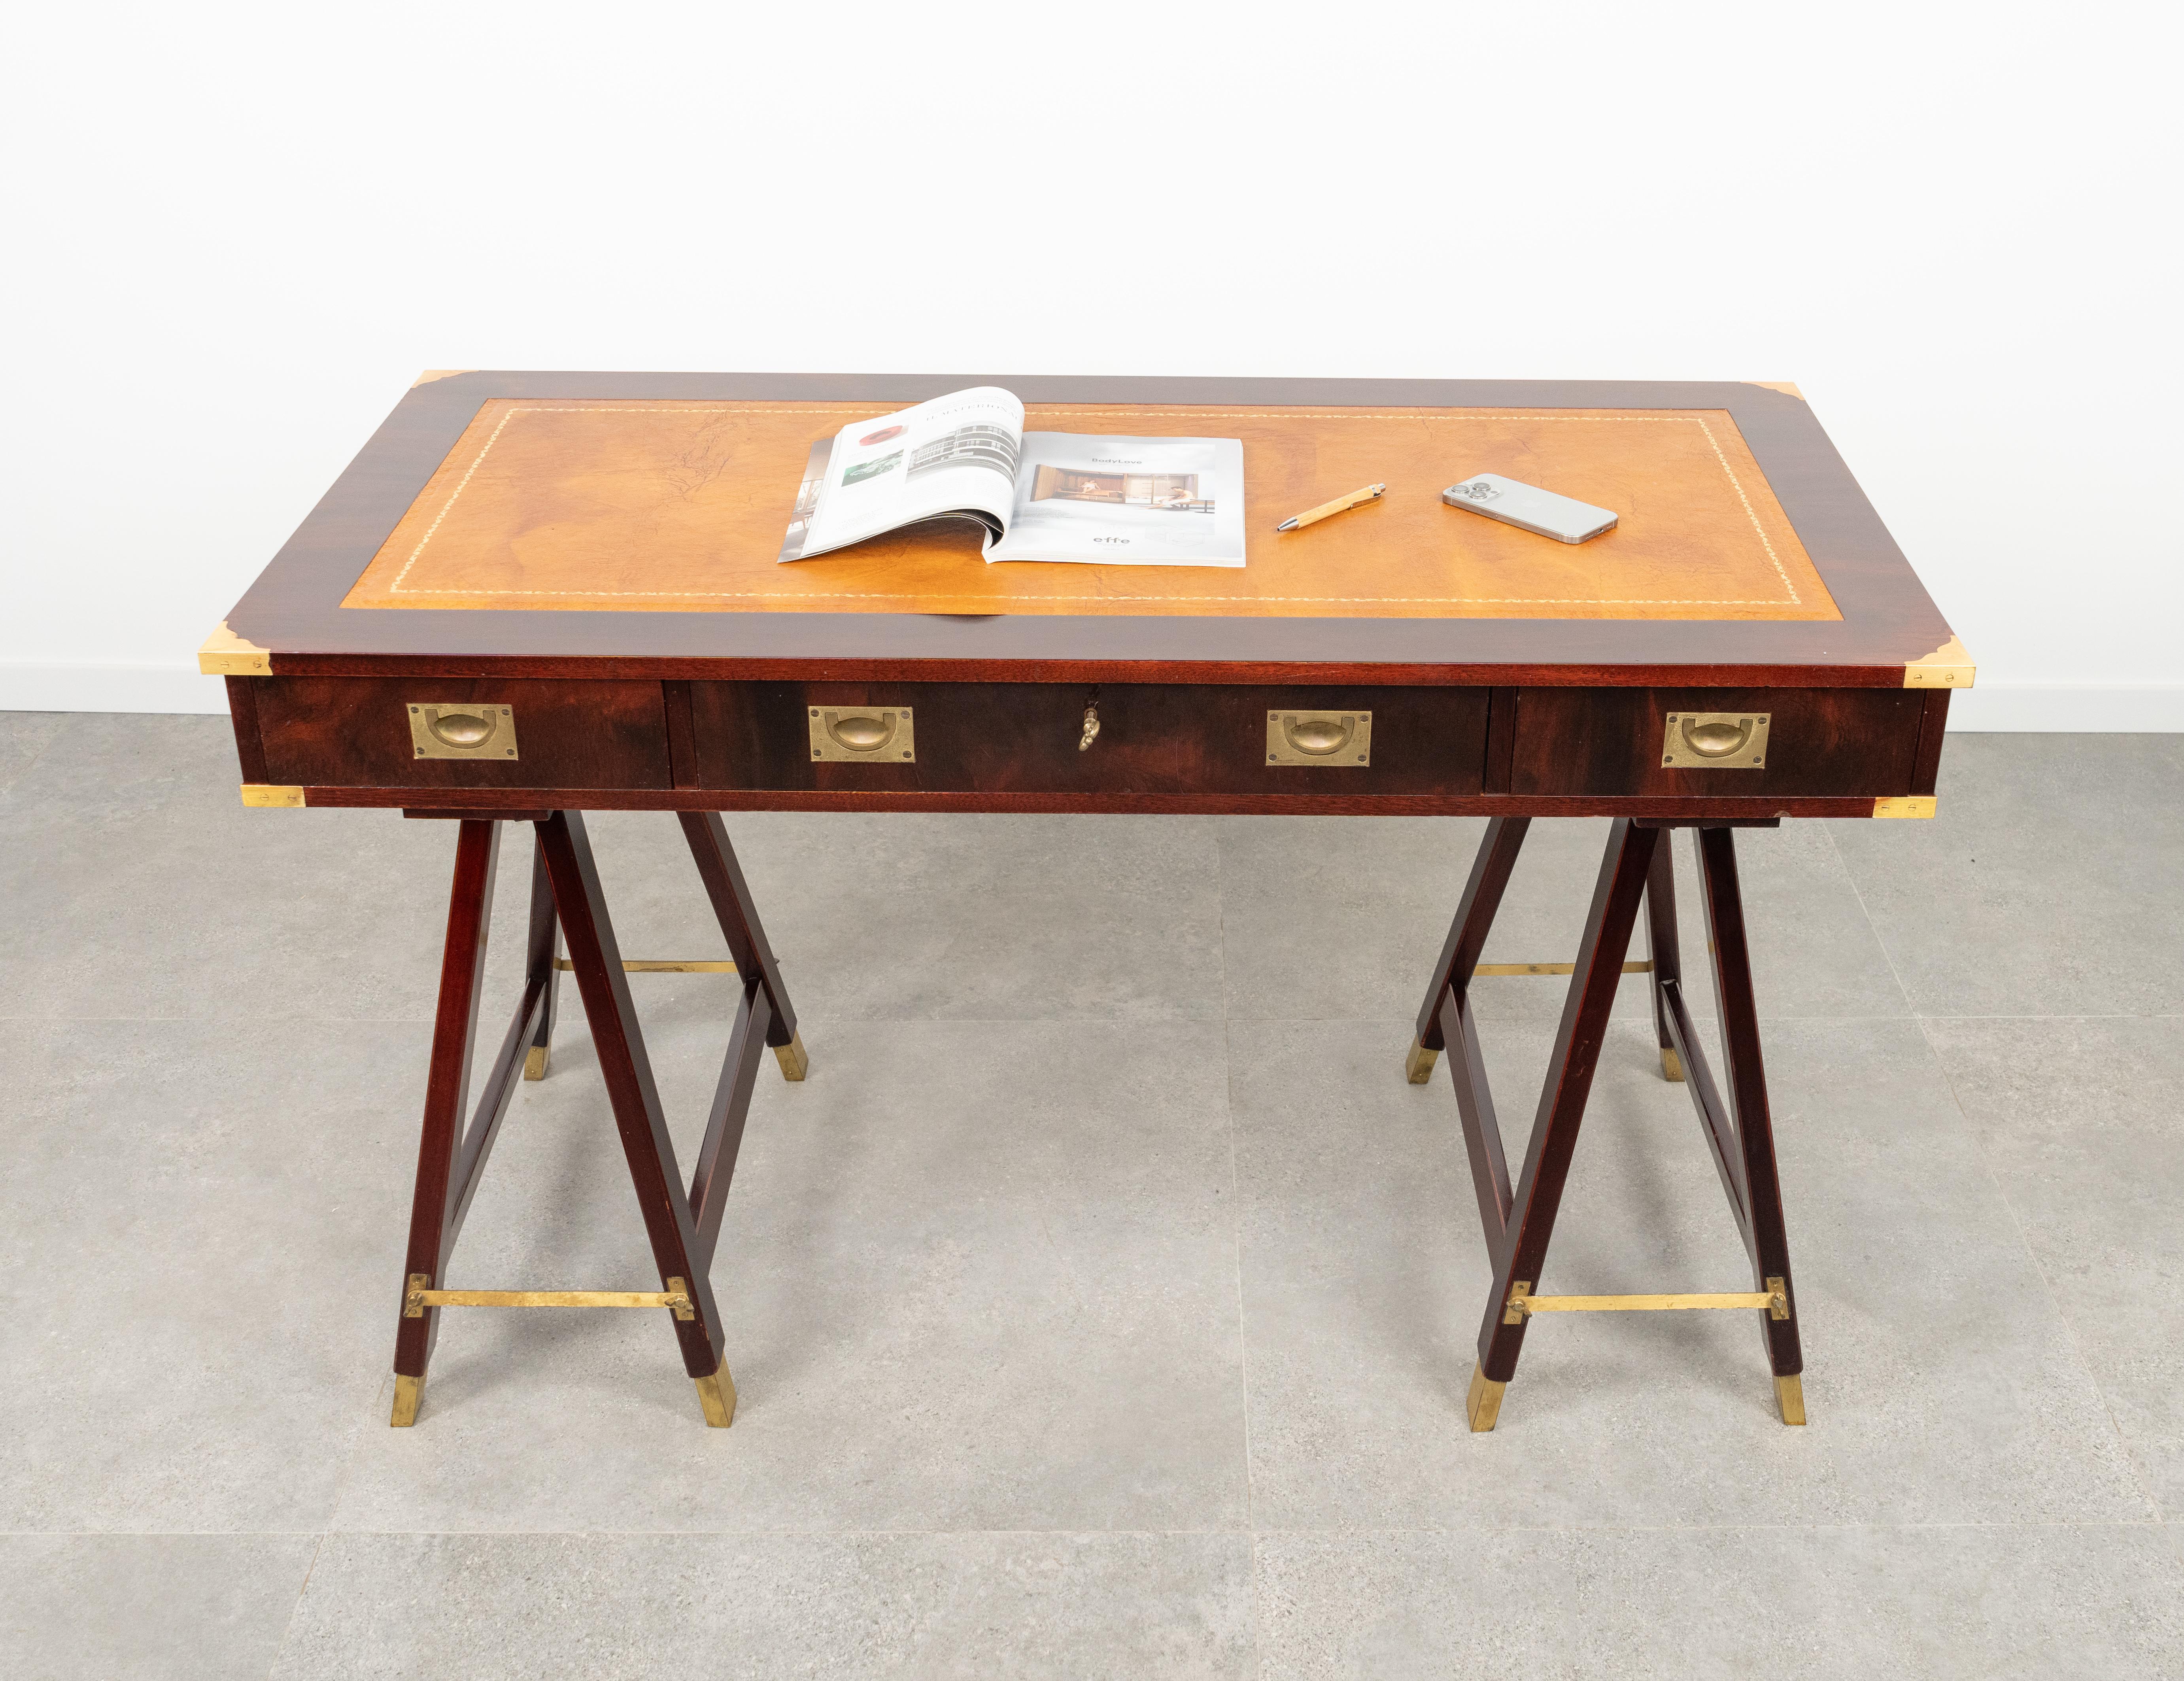 Military Campaign Style Desk Table in Wood, Brass and Leather, Italy 1960s For Sale 6